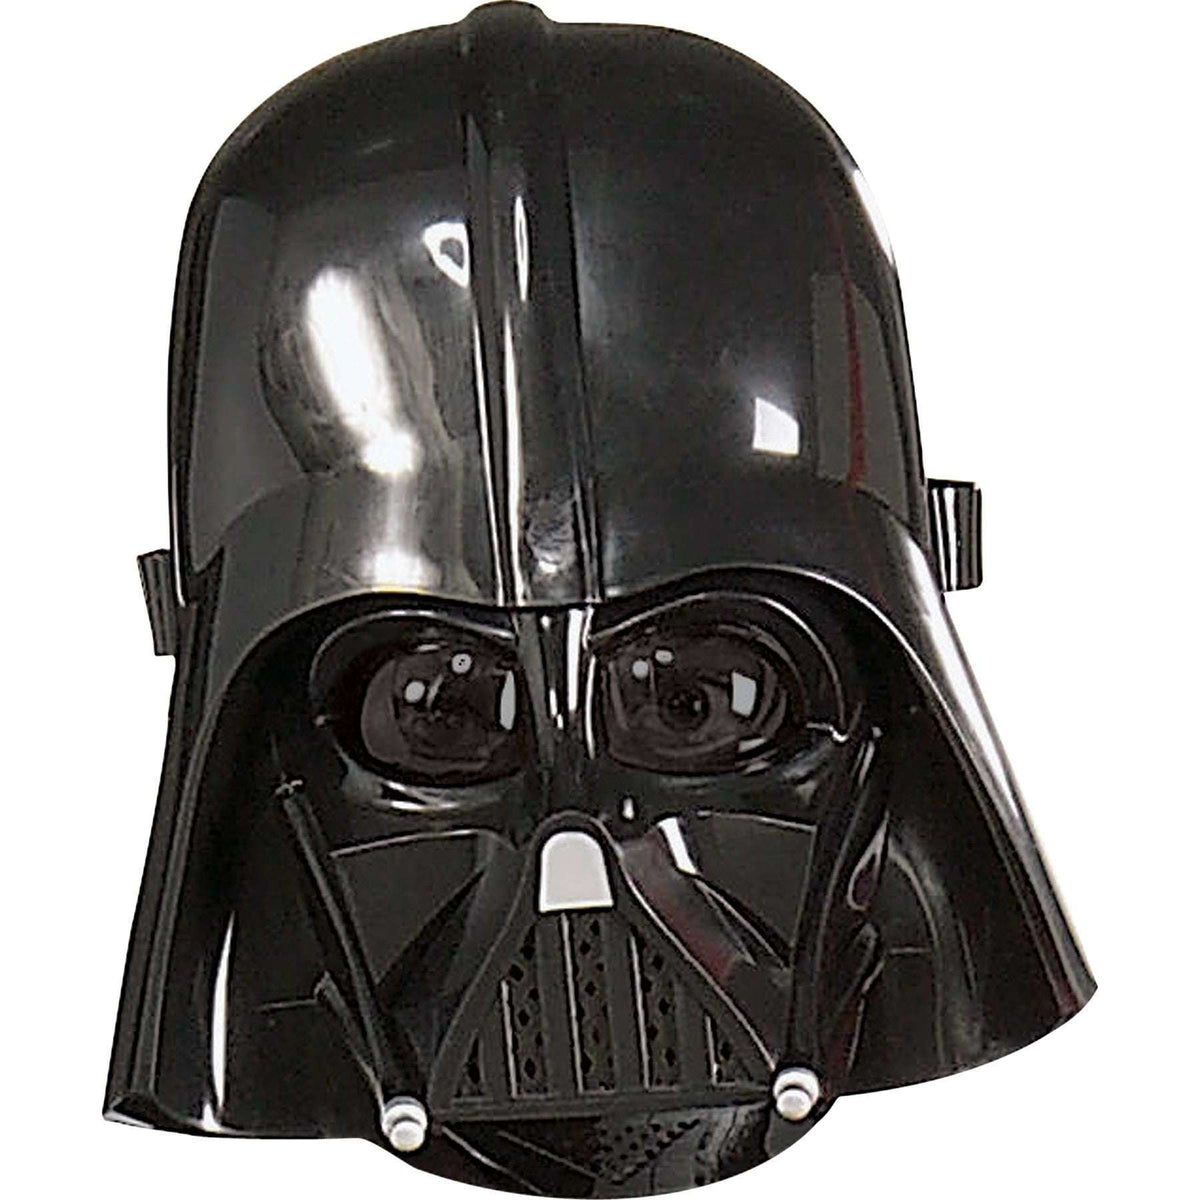 Child's Darth Vader Face Mask - Star Wars Classic